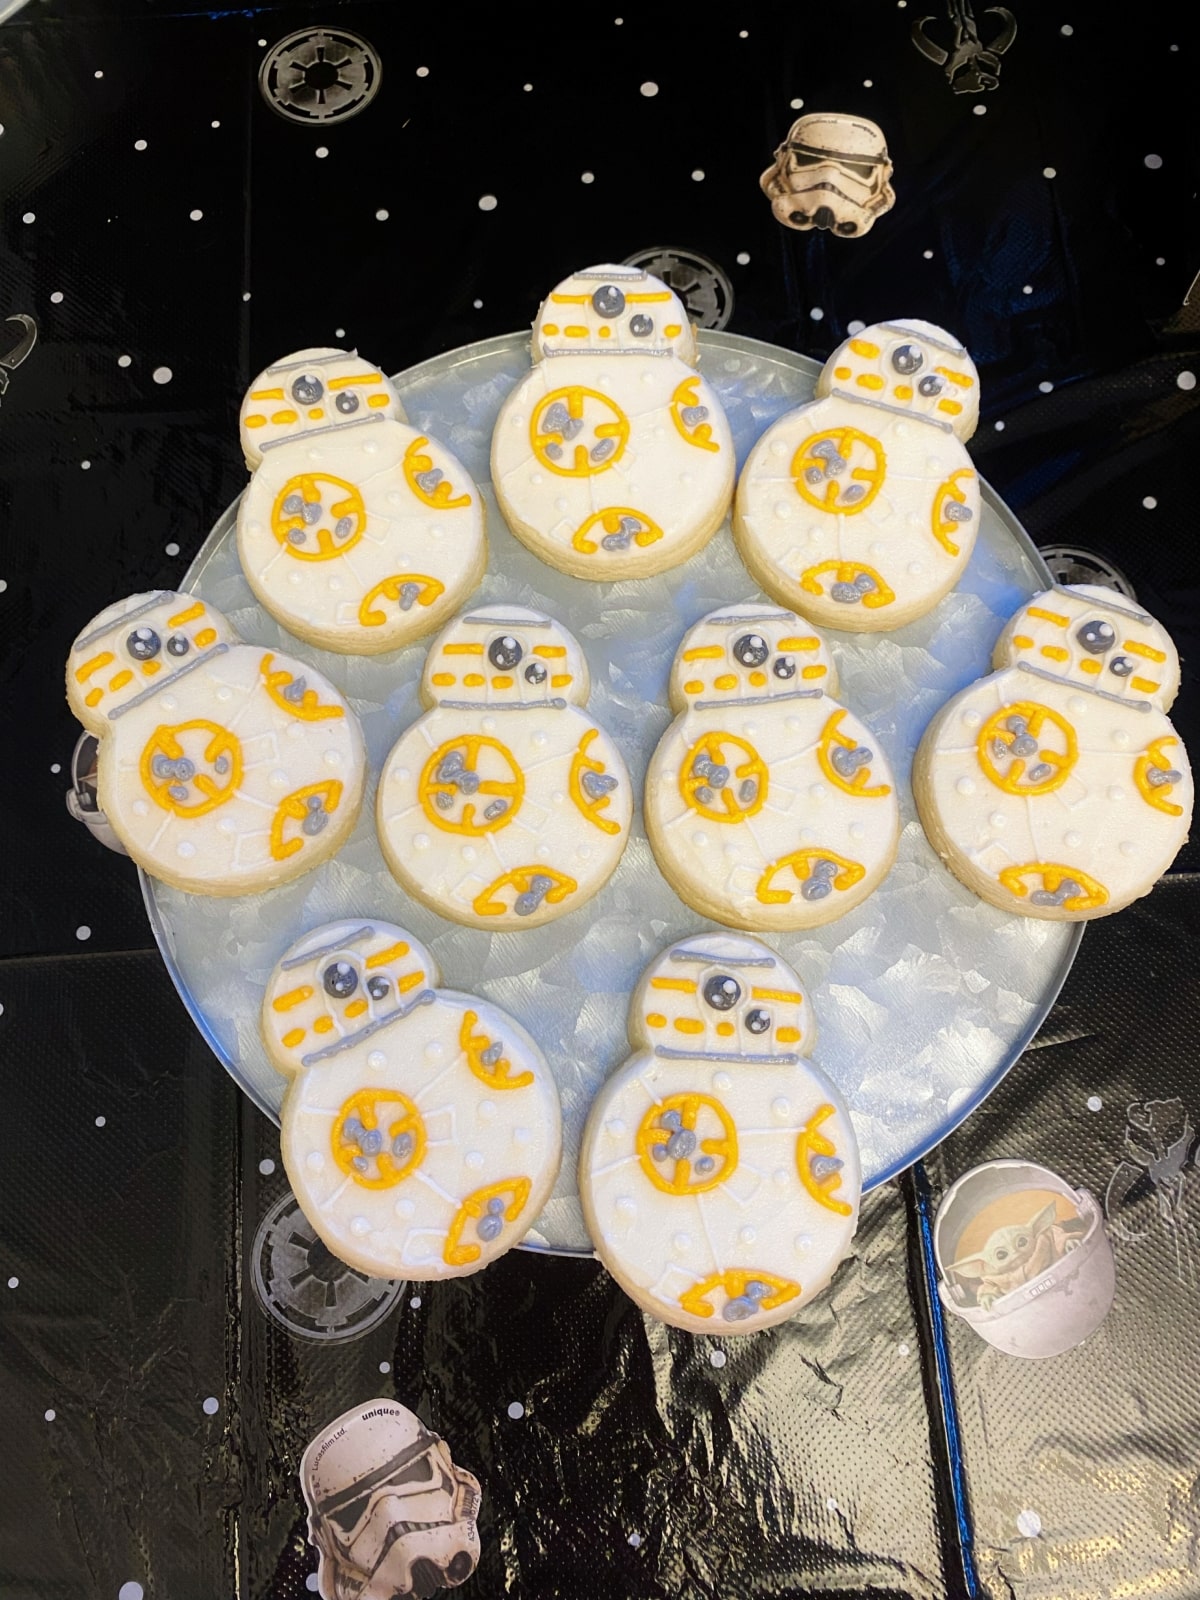 decorated bb8 cookies with buttercream